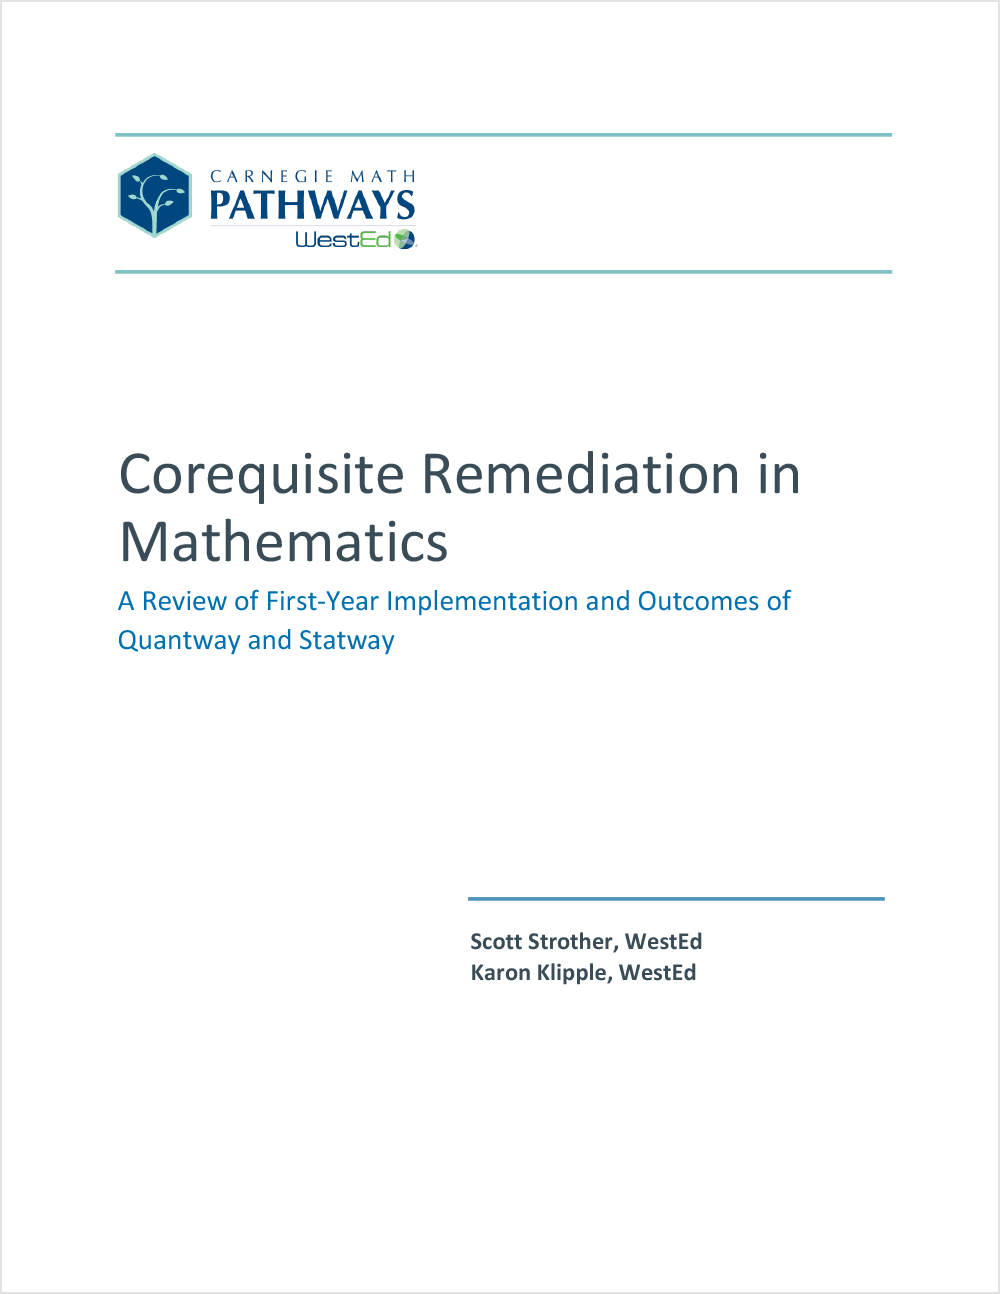 Corequisite Remediation in Mathematics: A Review of First-Year Implementation and Outcomes of Quantway and Statway